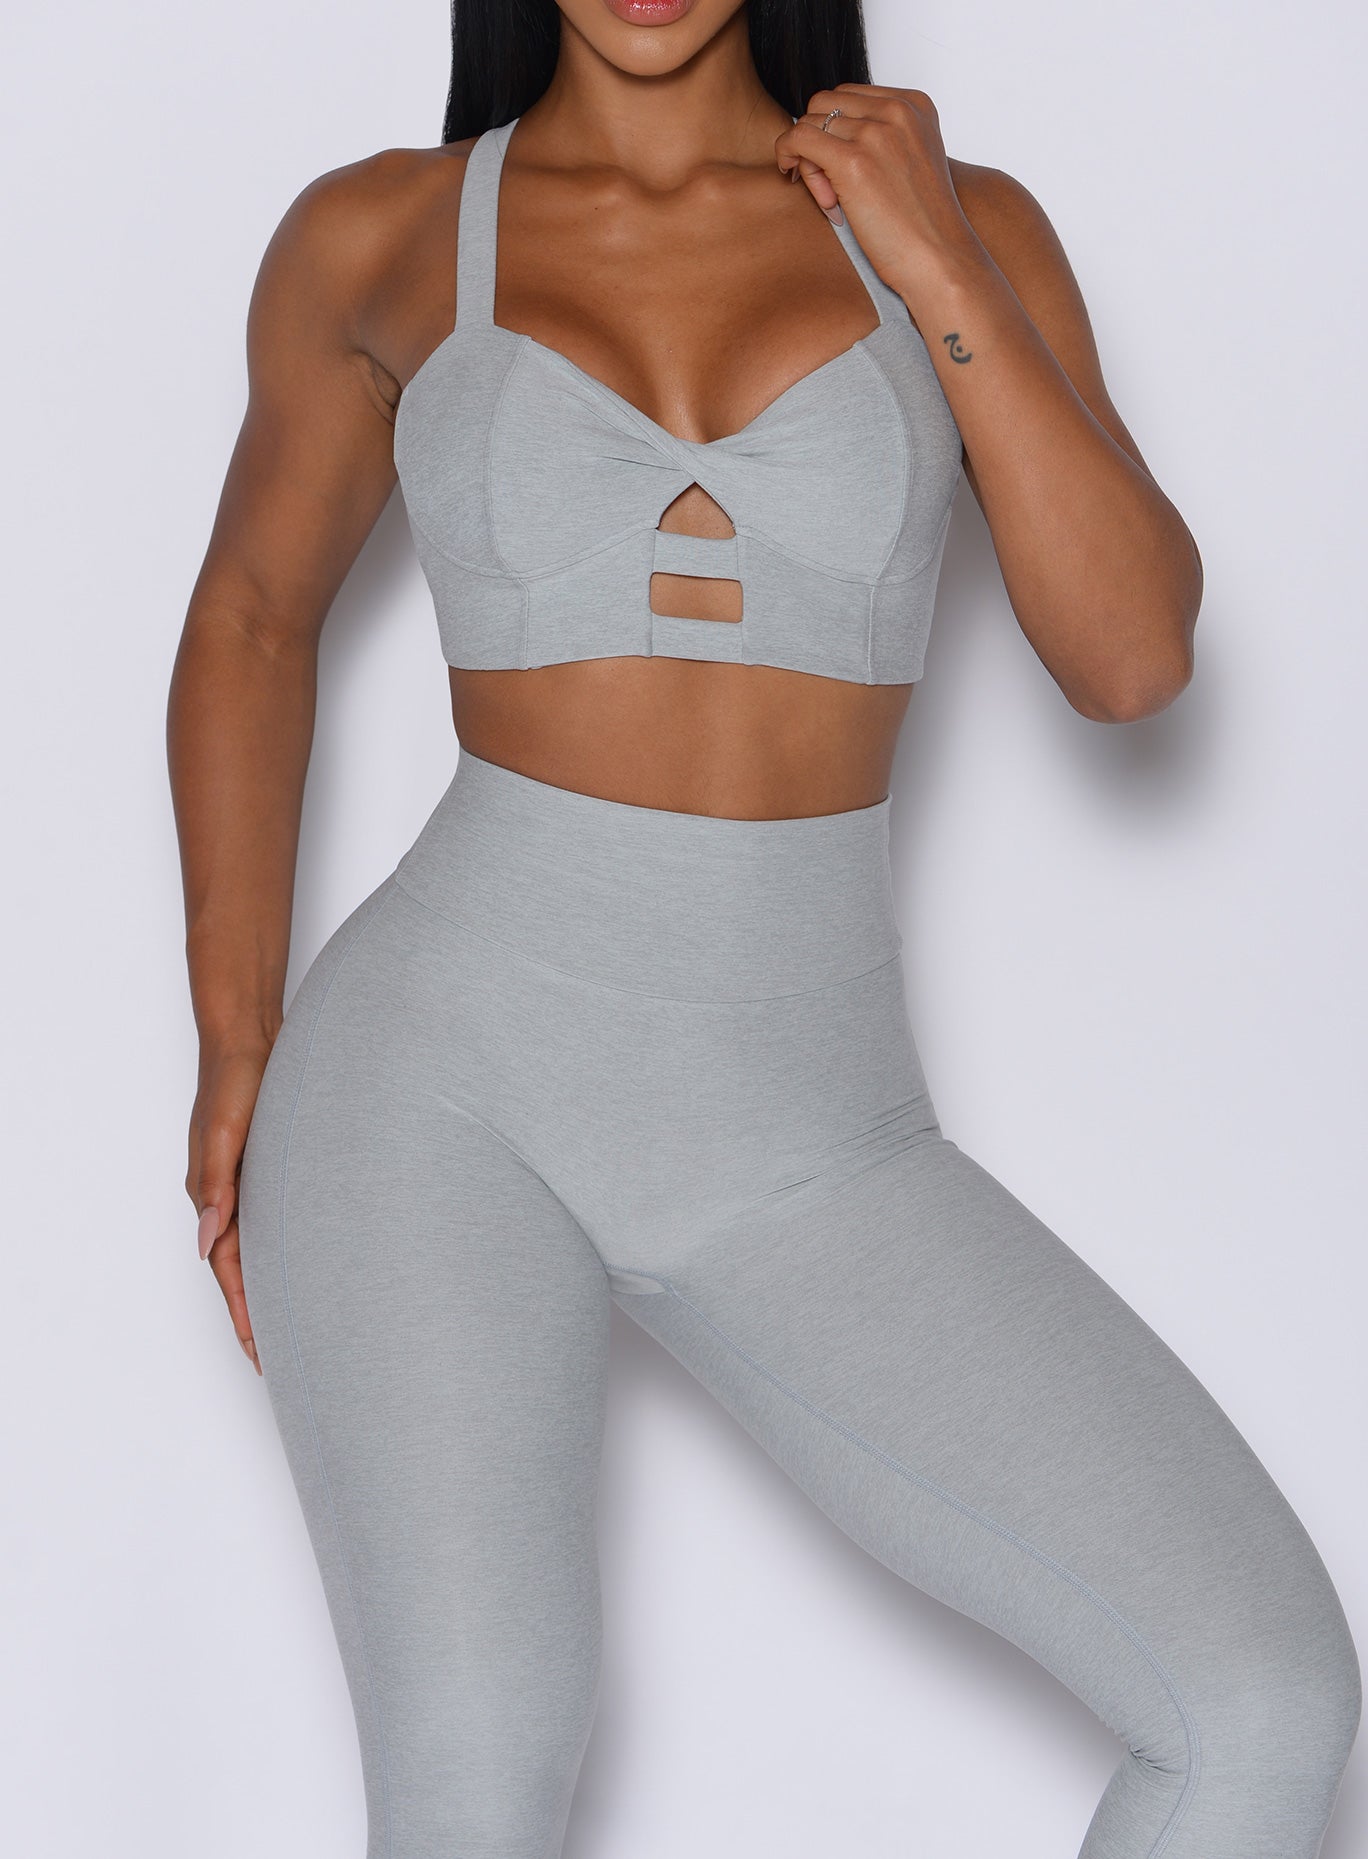 front profile view of a model wearing our core set bra in light cloud color along with the matching leggings